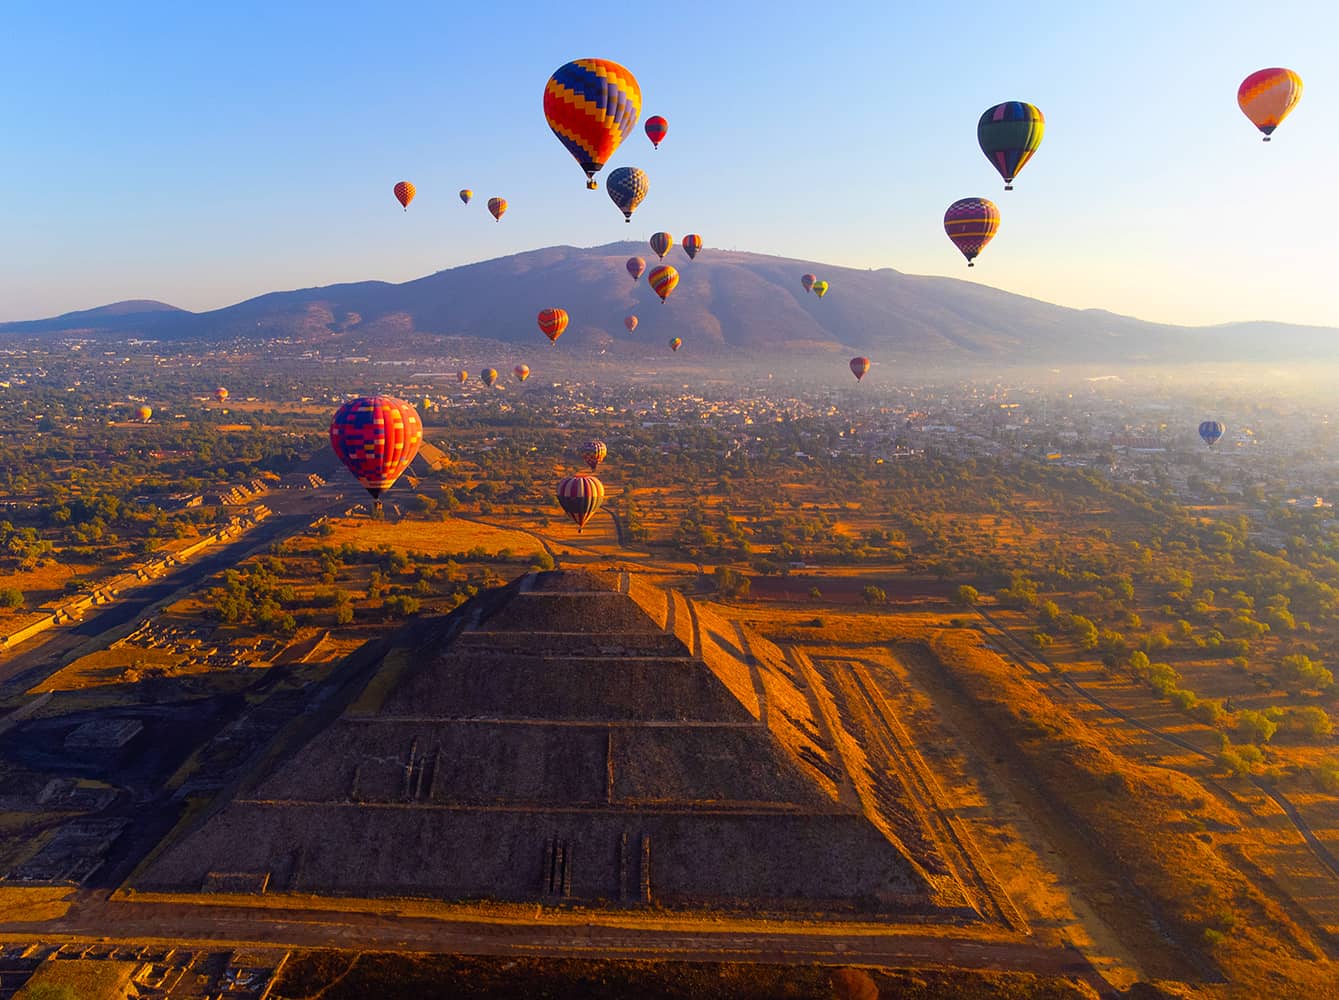  Soar over the ancient city of the gods in a hot air balloon.  